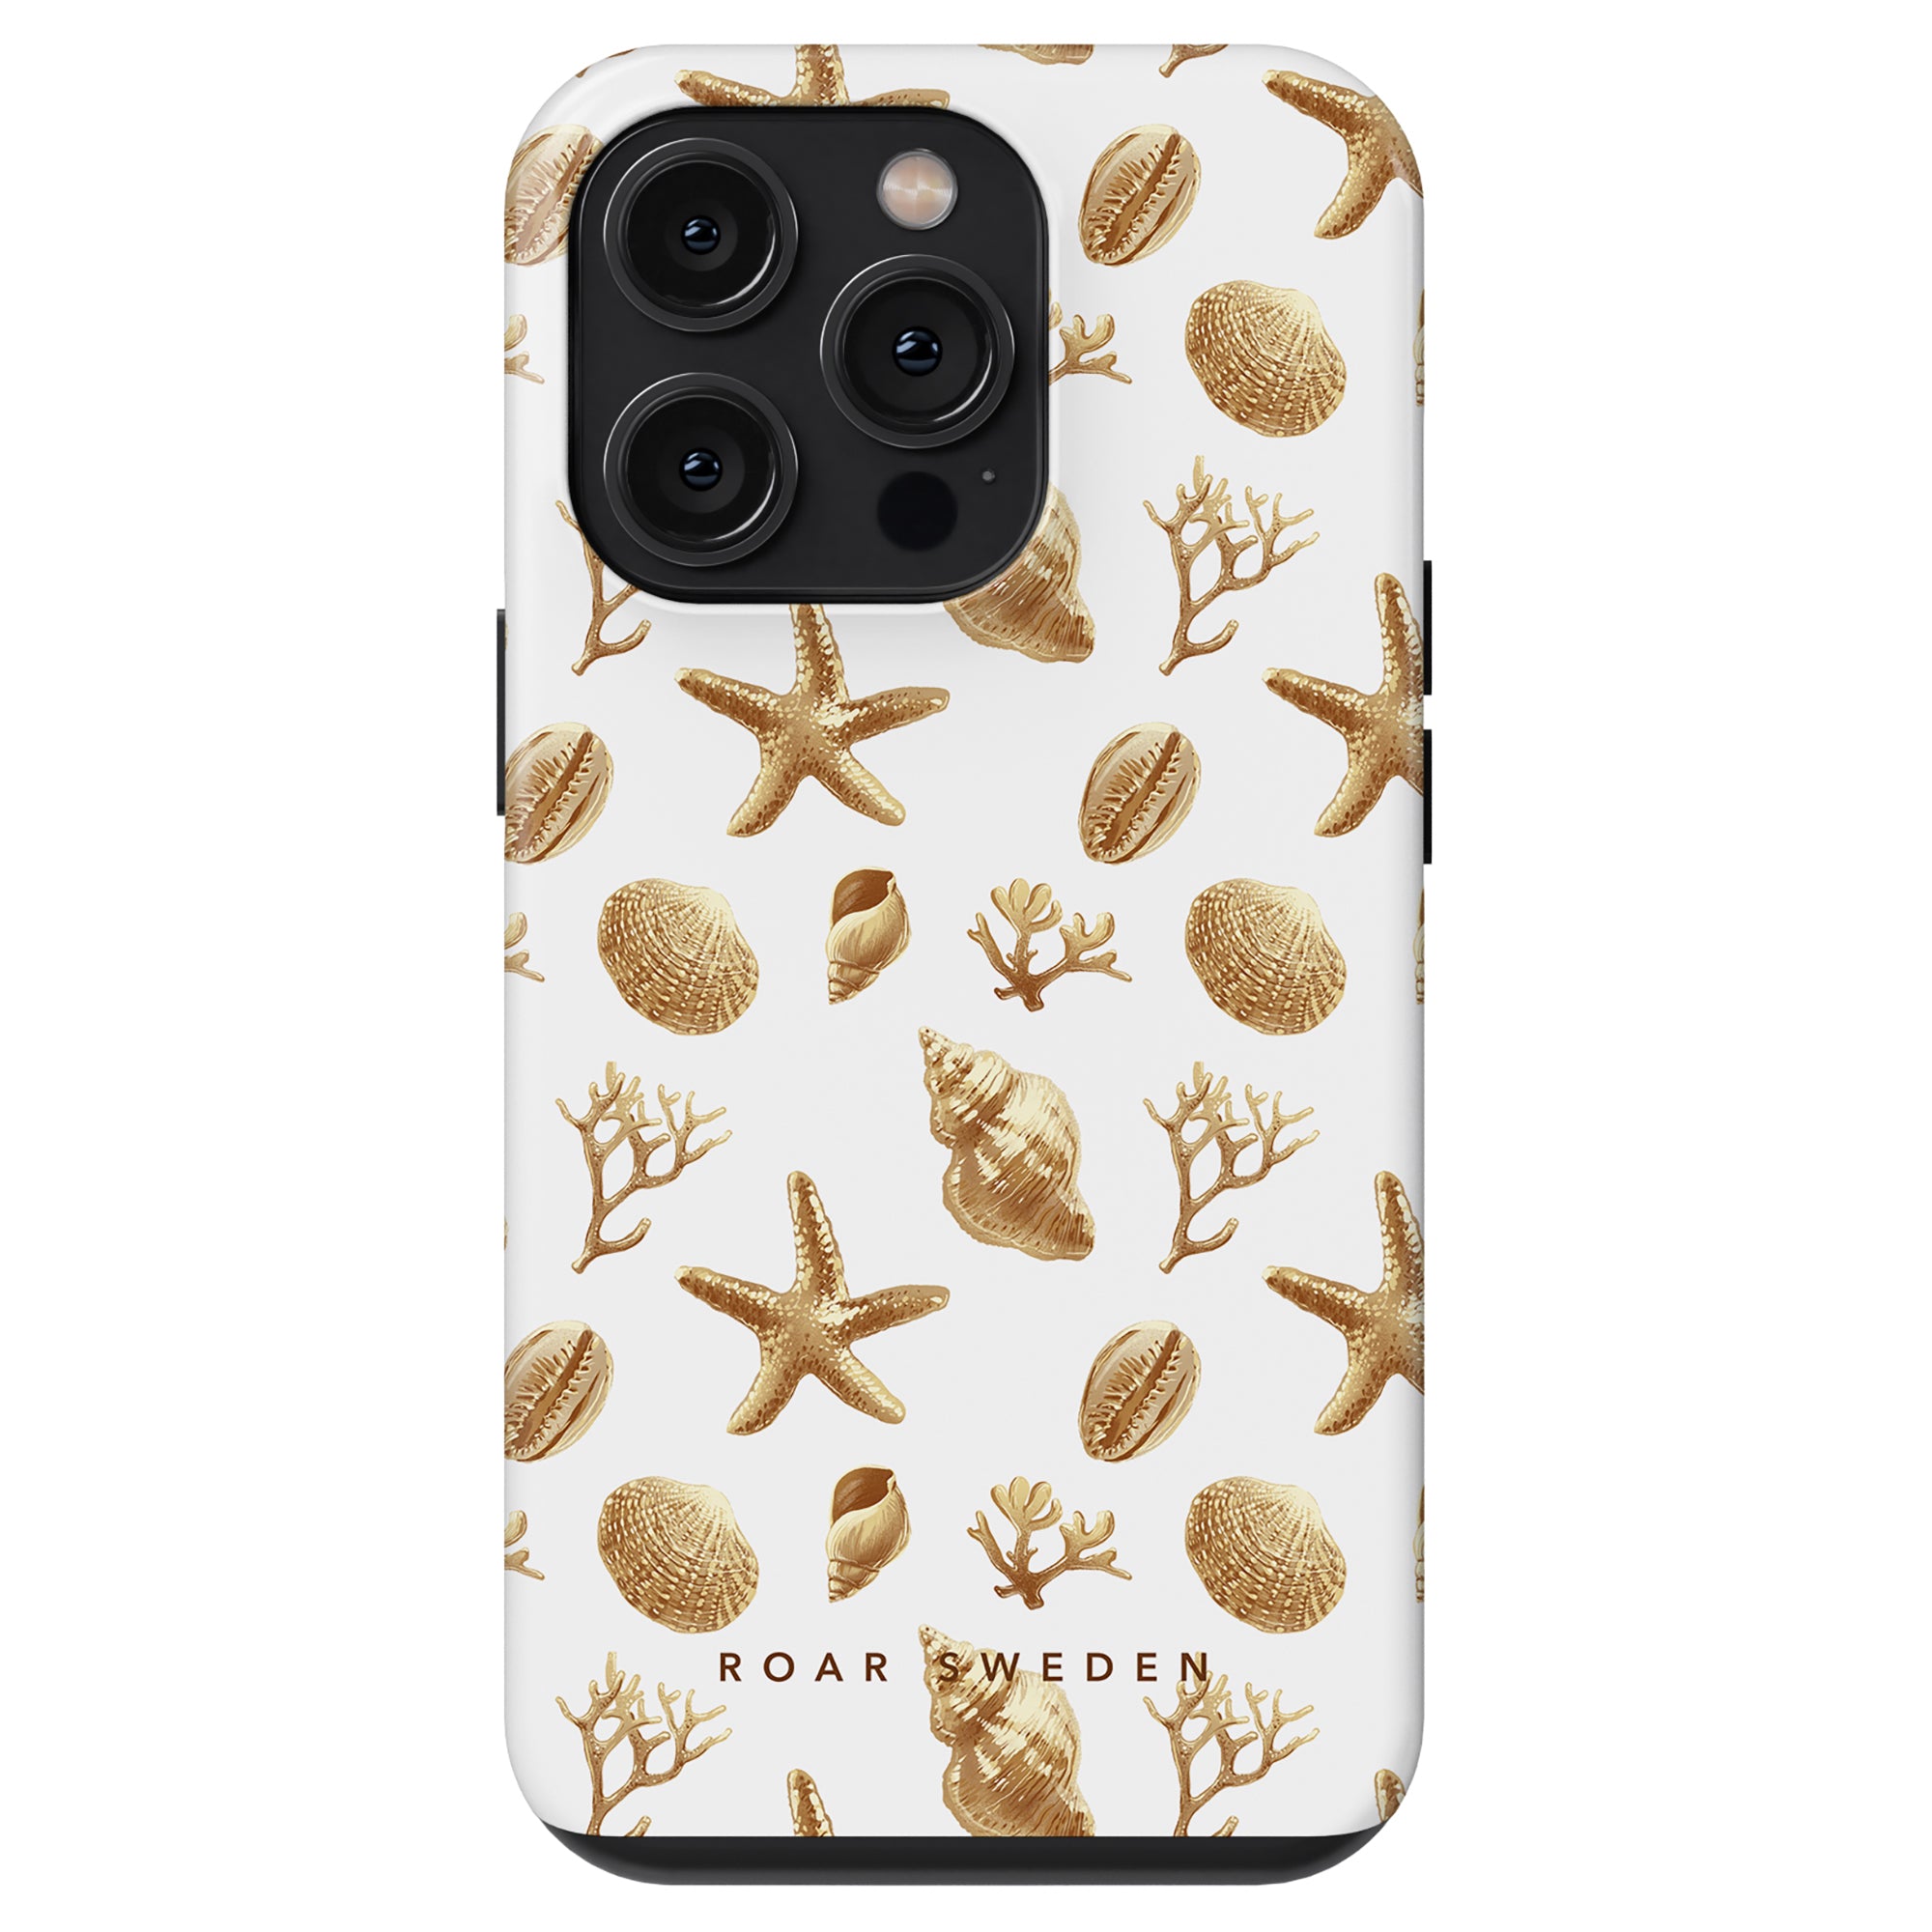 A phone case with a marine-themed pattern featuring Golden Shells, seashells, and coral on a white background from our ocean collection.